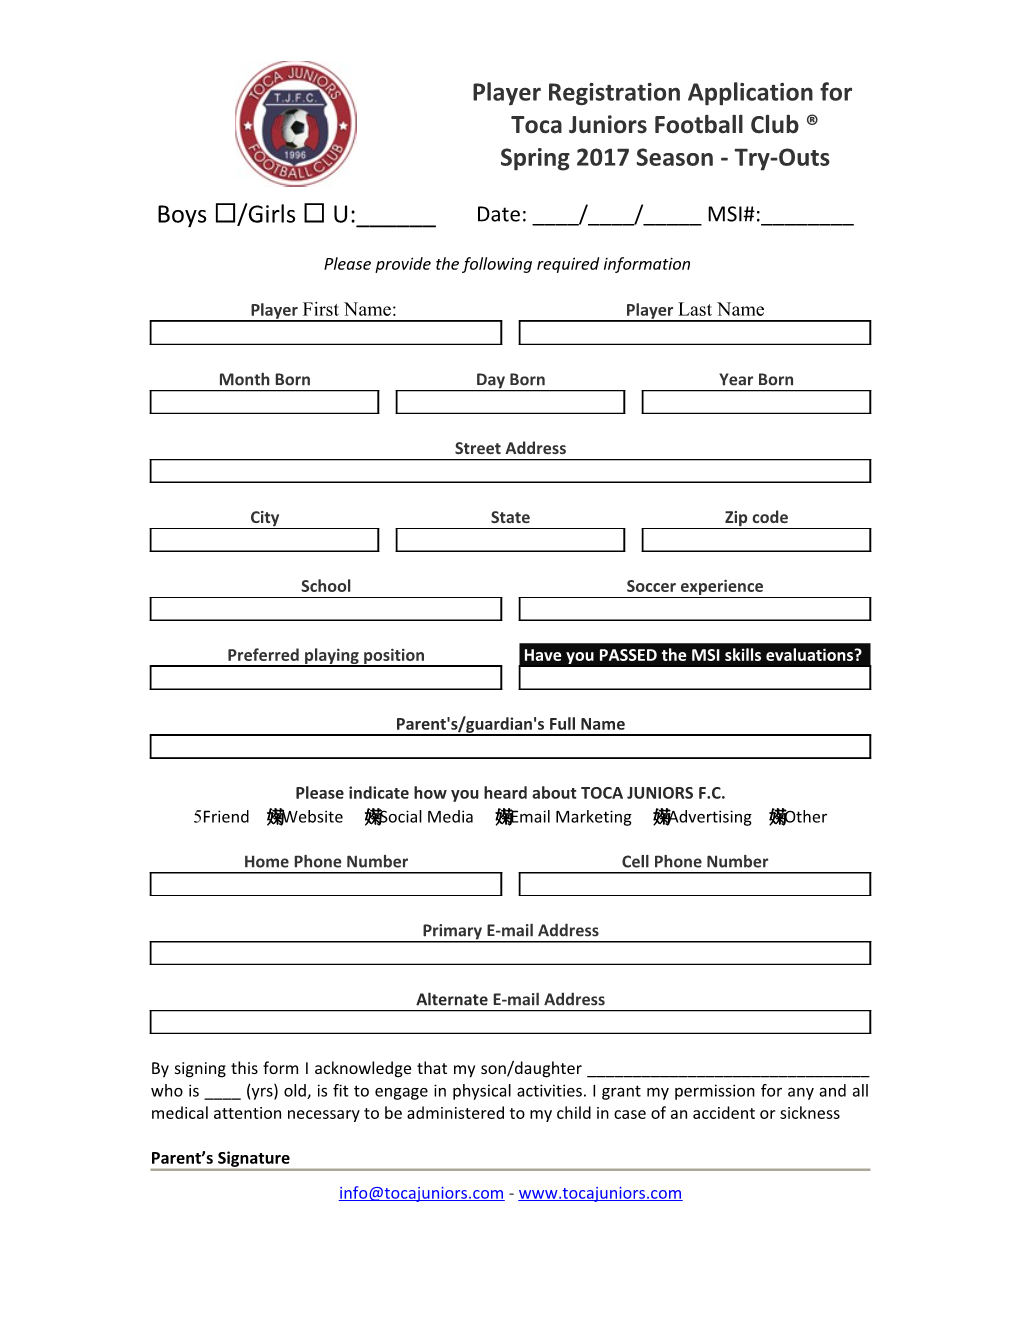 Toca Juniors Football Club Youth and Adult Soccer Tryout Player Registation Form